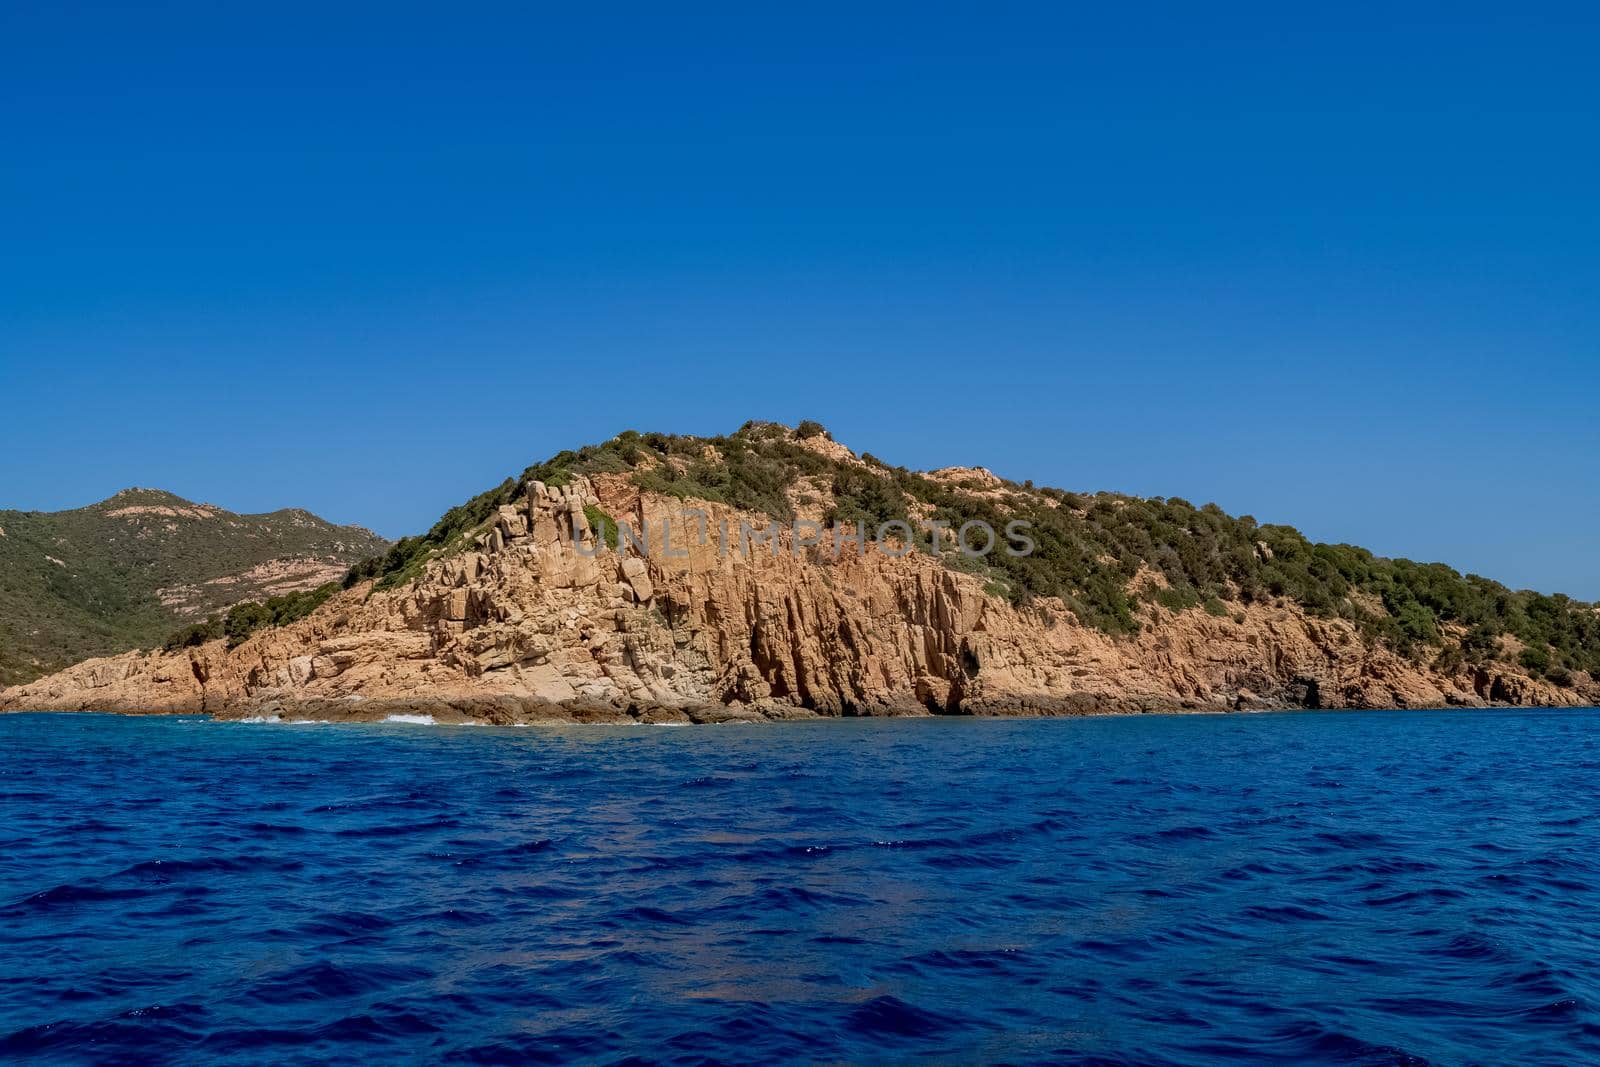 Beautiful view of the southern Sardinian sea from the boat. Note the particular rock formations.